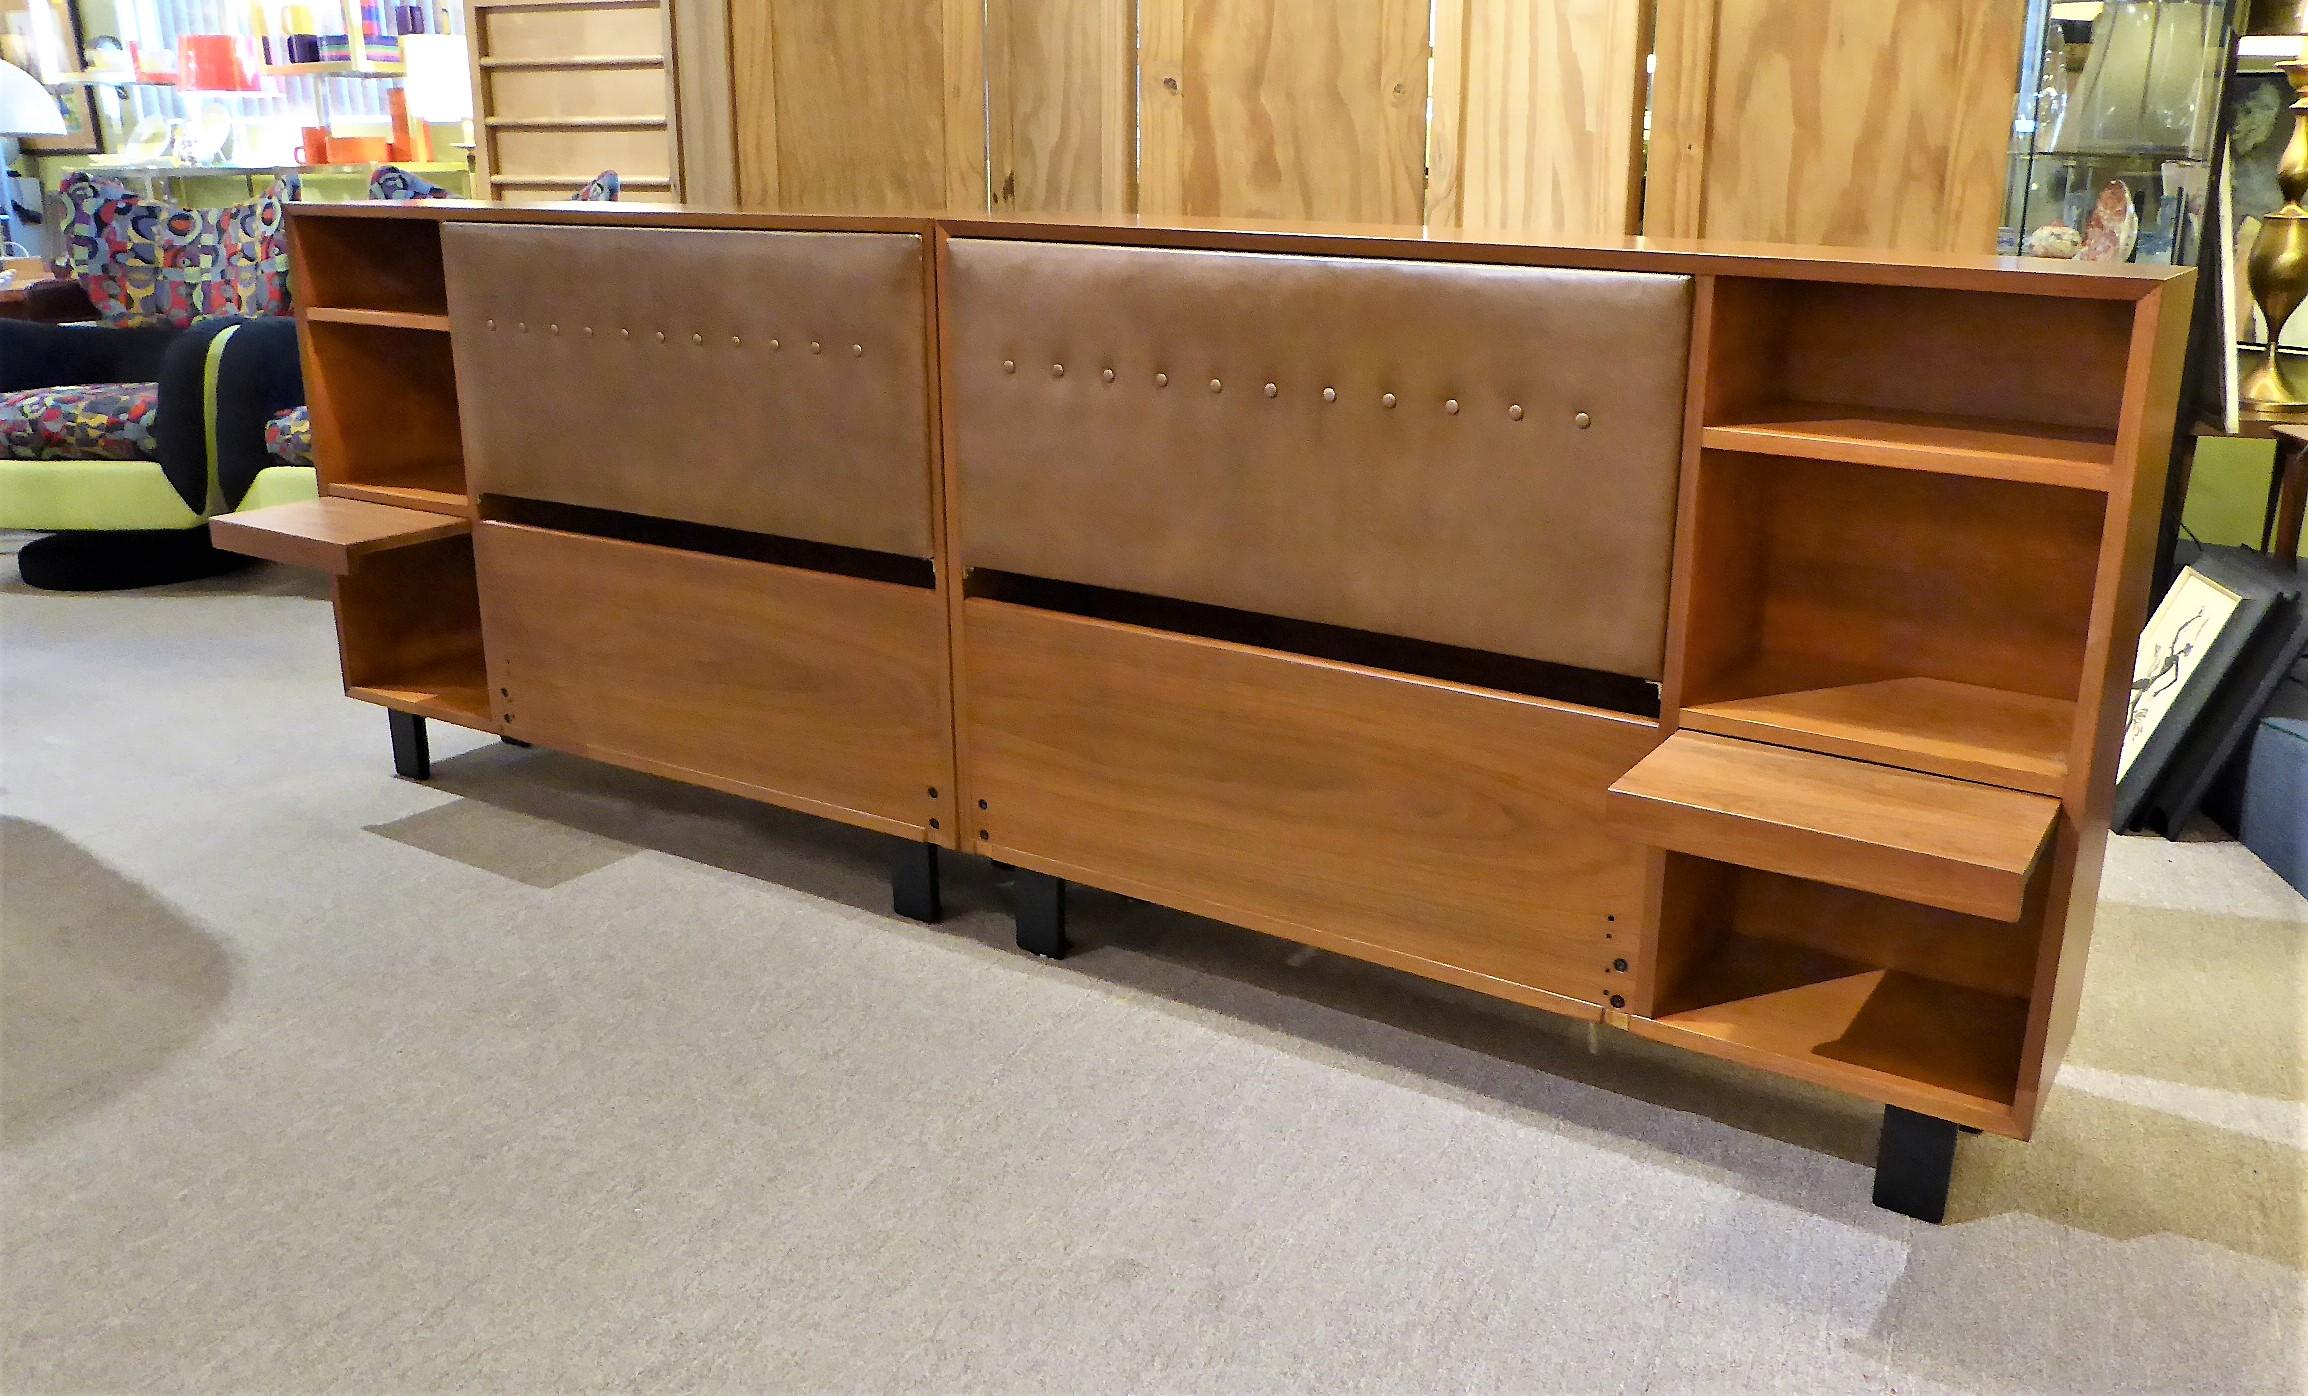 Smart and classic George Nelson design for the Herman Miller collection of the early 1950s, this pair of walnut King headboard storage units with bedside shelves and pull out tables are quite beautiful and utile. Consisting of a mirror image left